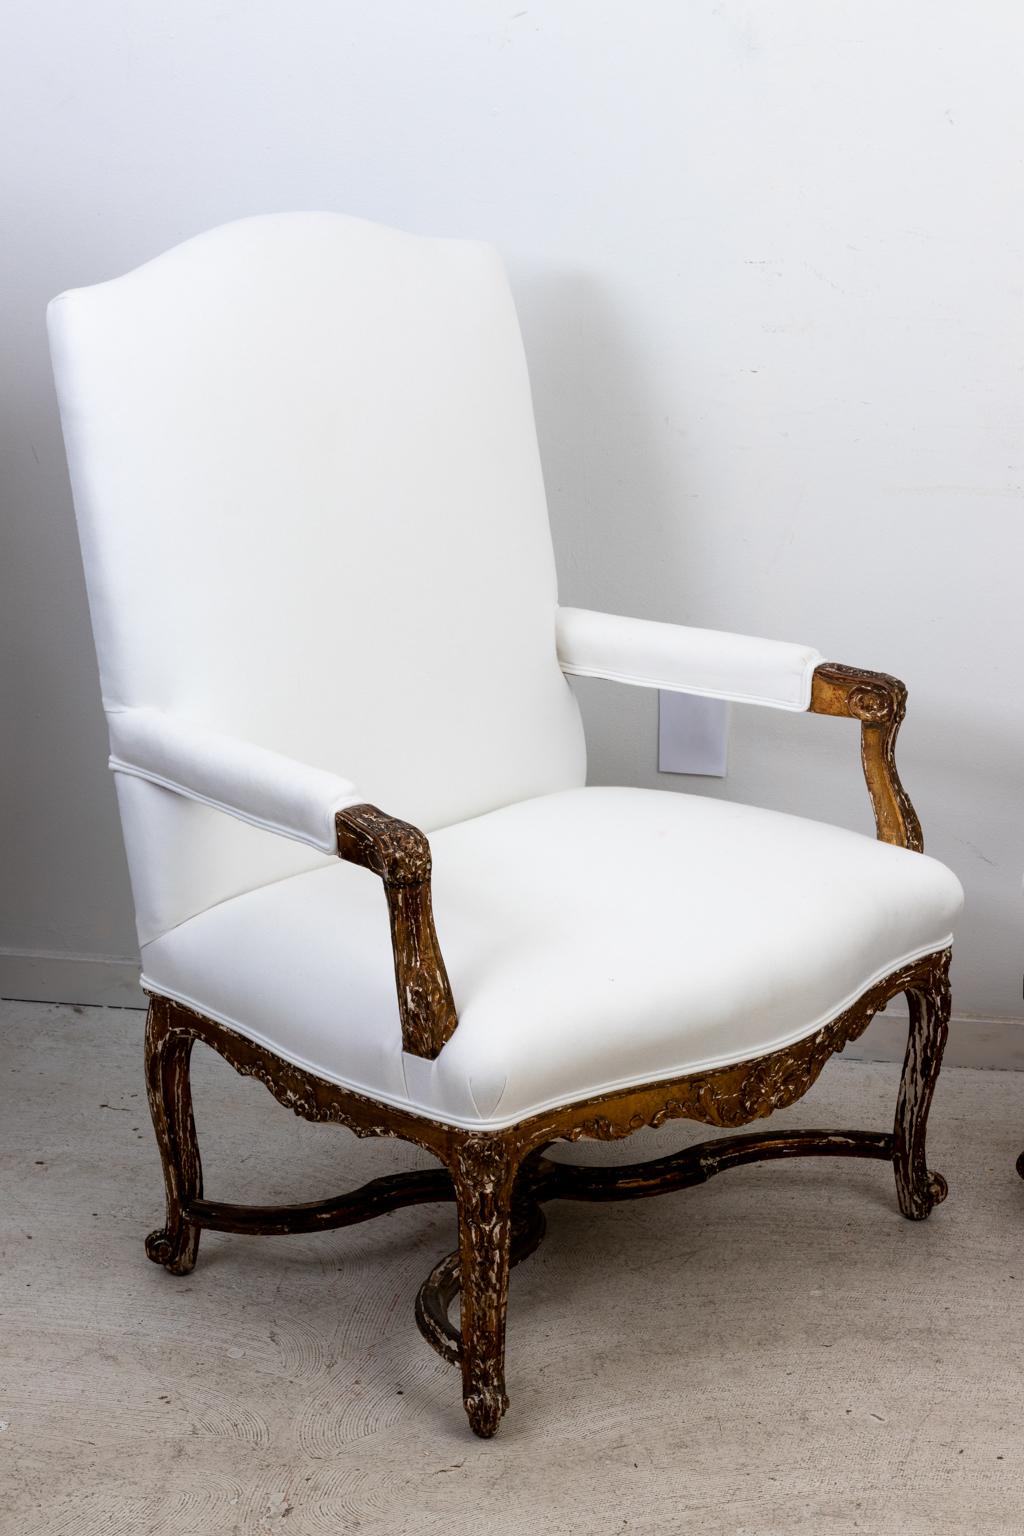 Circa 1860s pair of 19th century Louis XV style carved armchairs that have been freshly upholstered. Made in France. Please note of wear consistent with age.